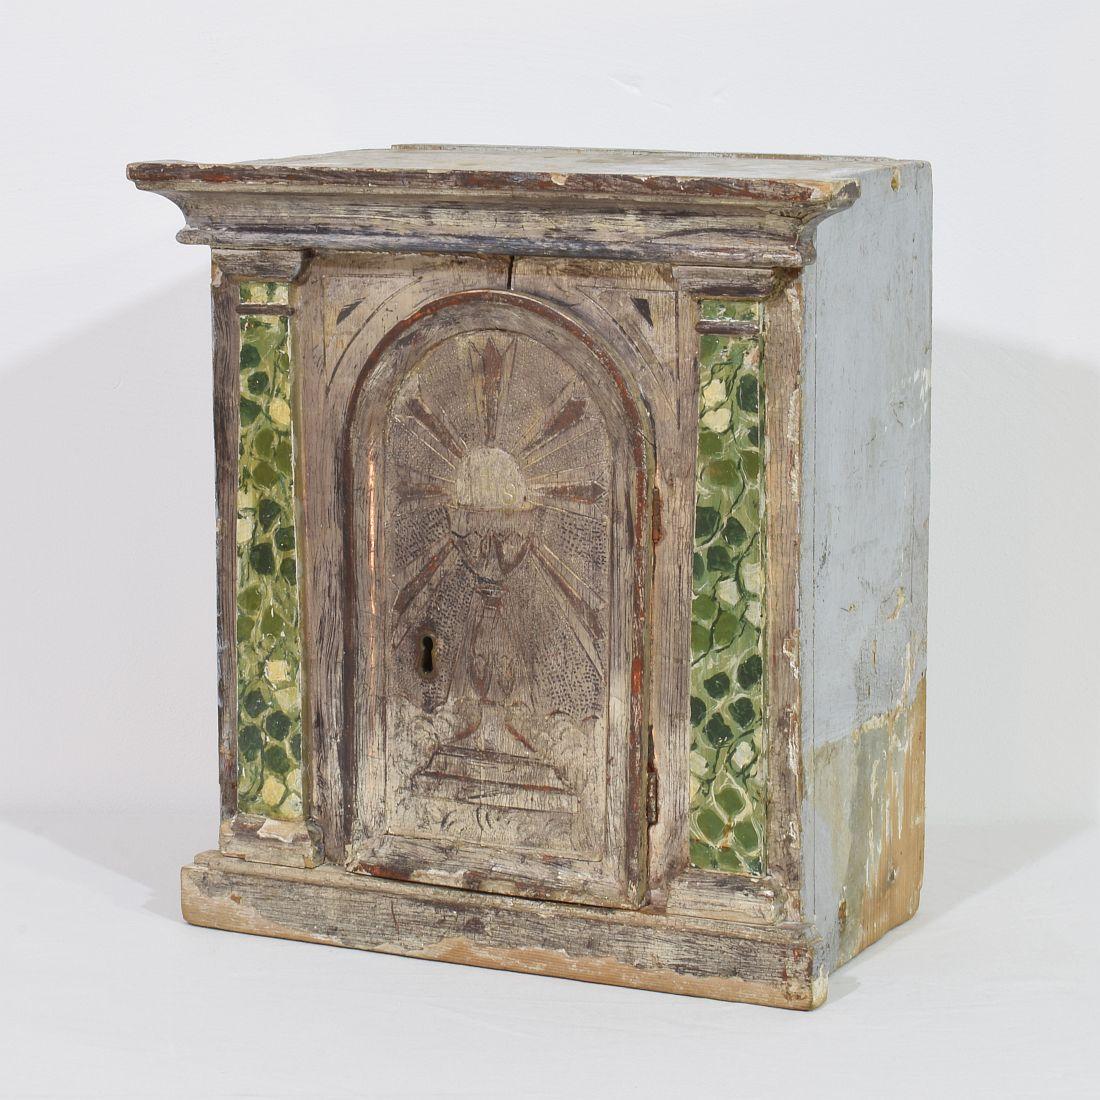 Wonderful small tabernacle that once graced a church altar. Beautiful original silverleaf and faux marble paint.
weathered, small losses. Italy circa 1780
 